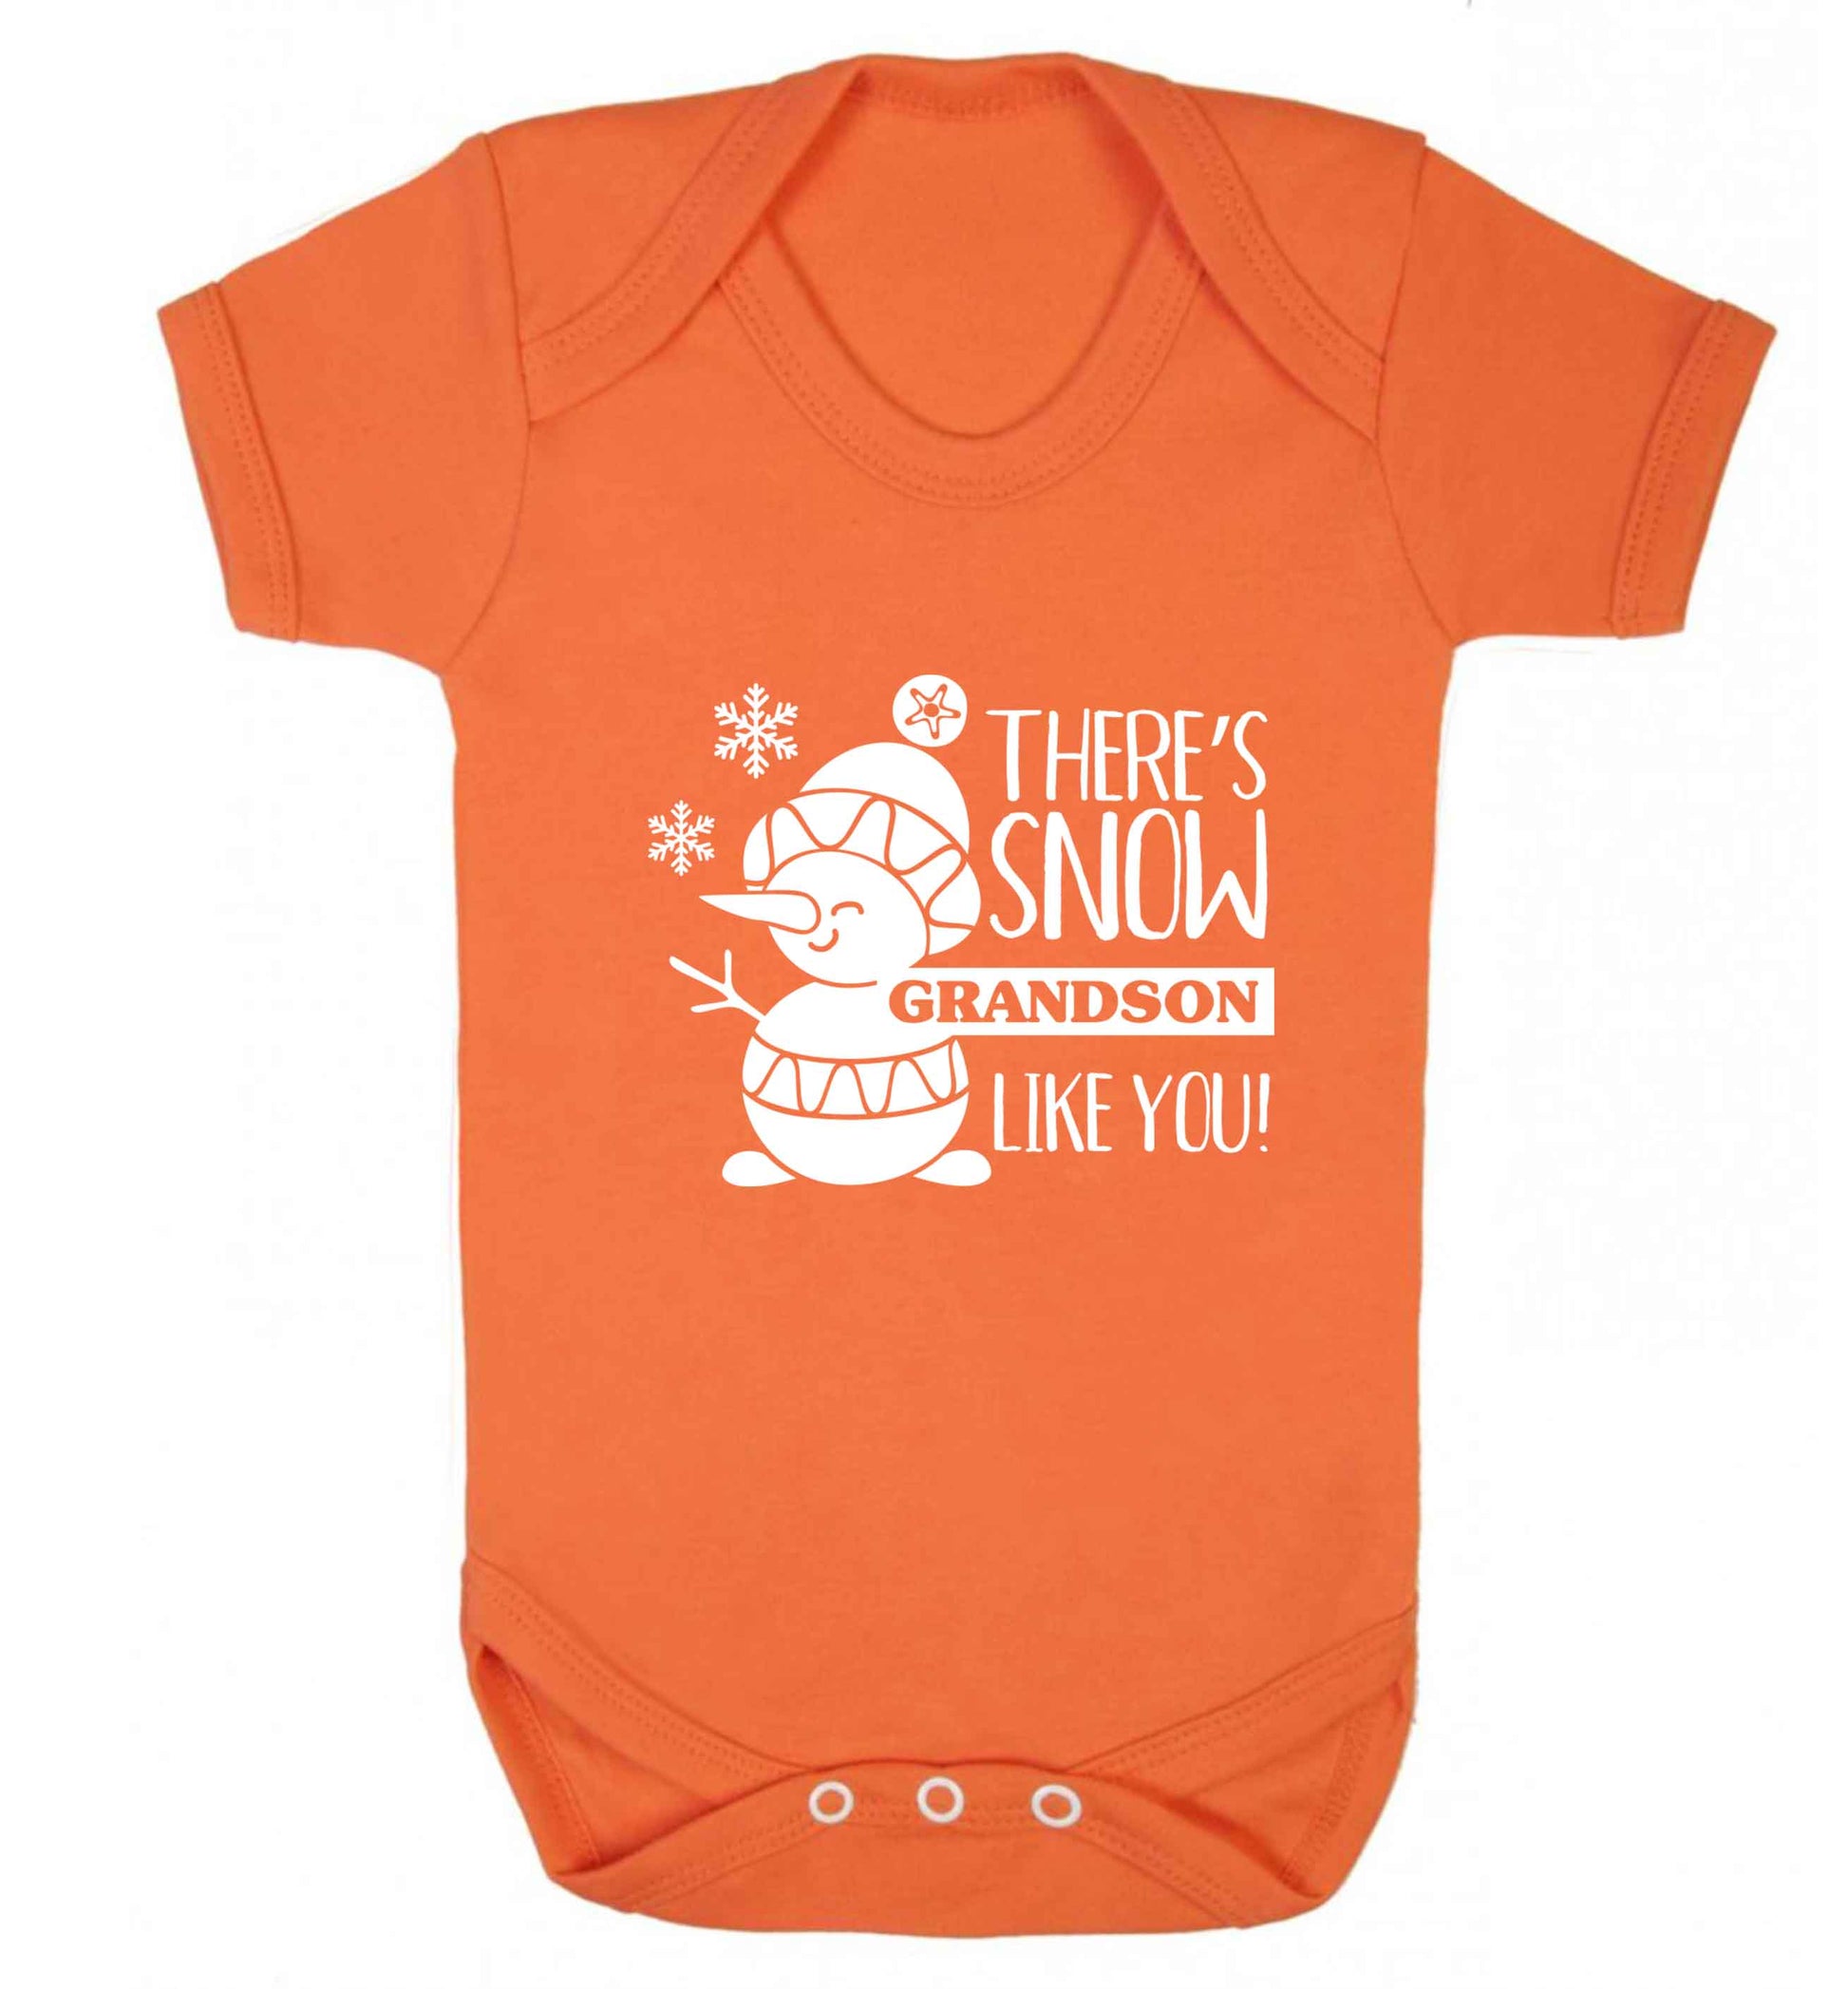 There's snow grandson like you baby vest orange 18-24 months